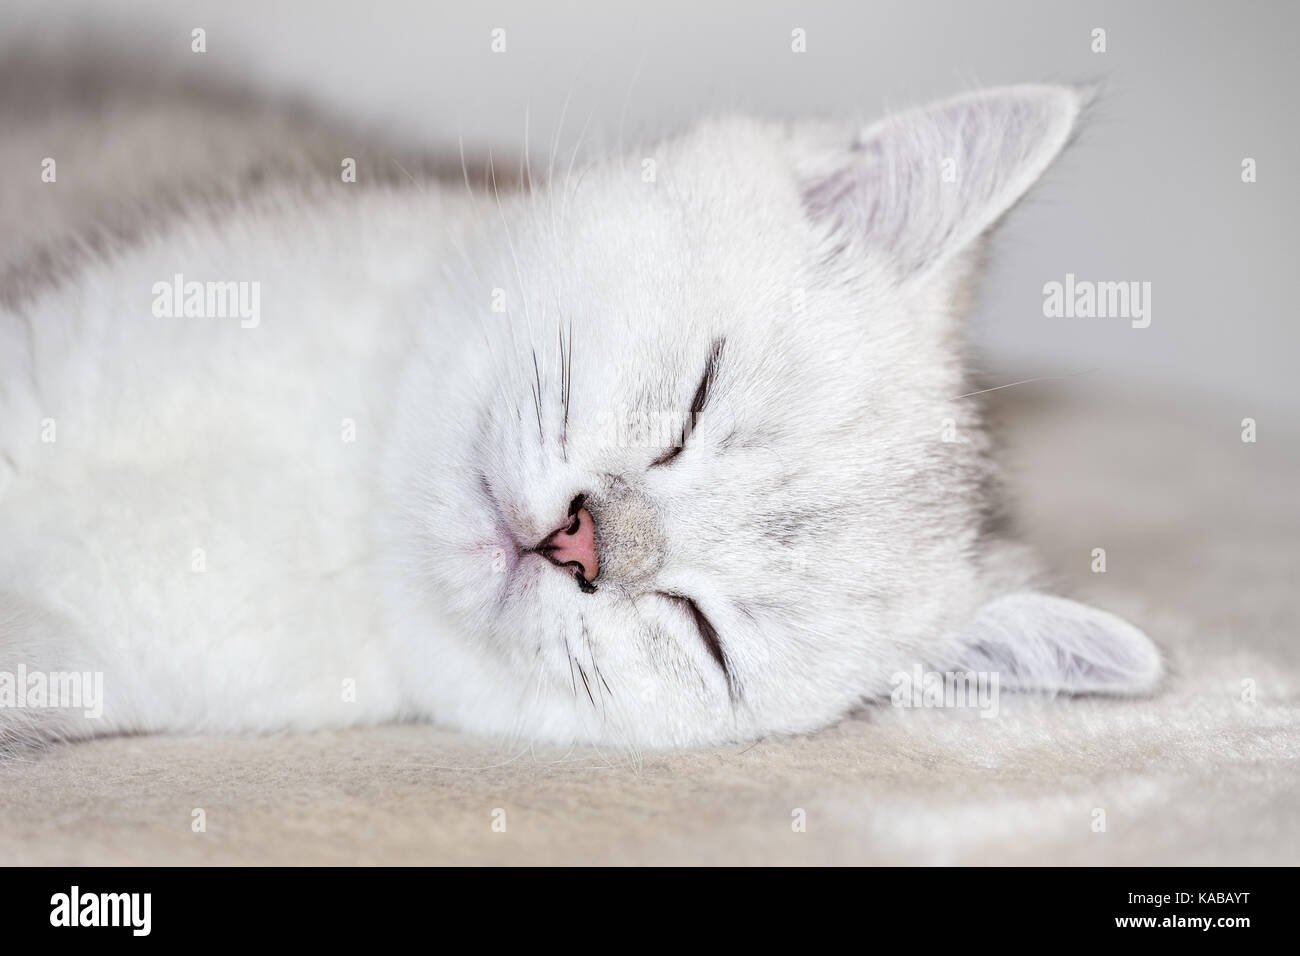 Close up head of young white kitten sleeping Stock Photo